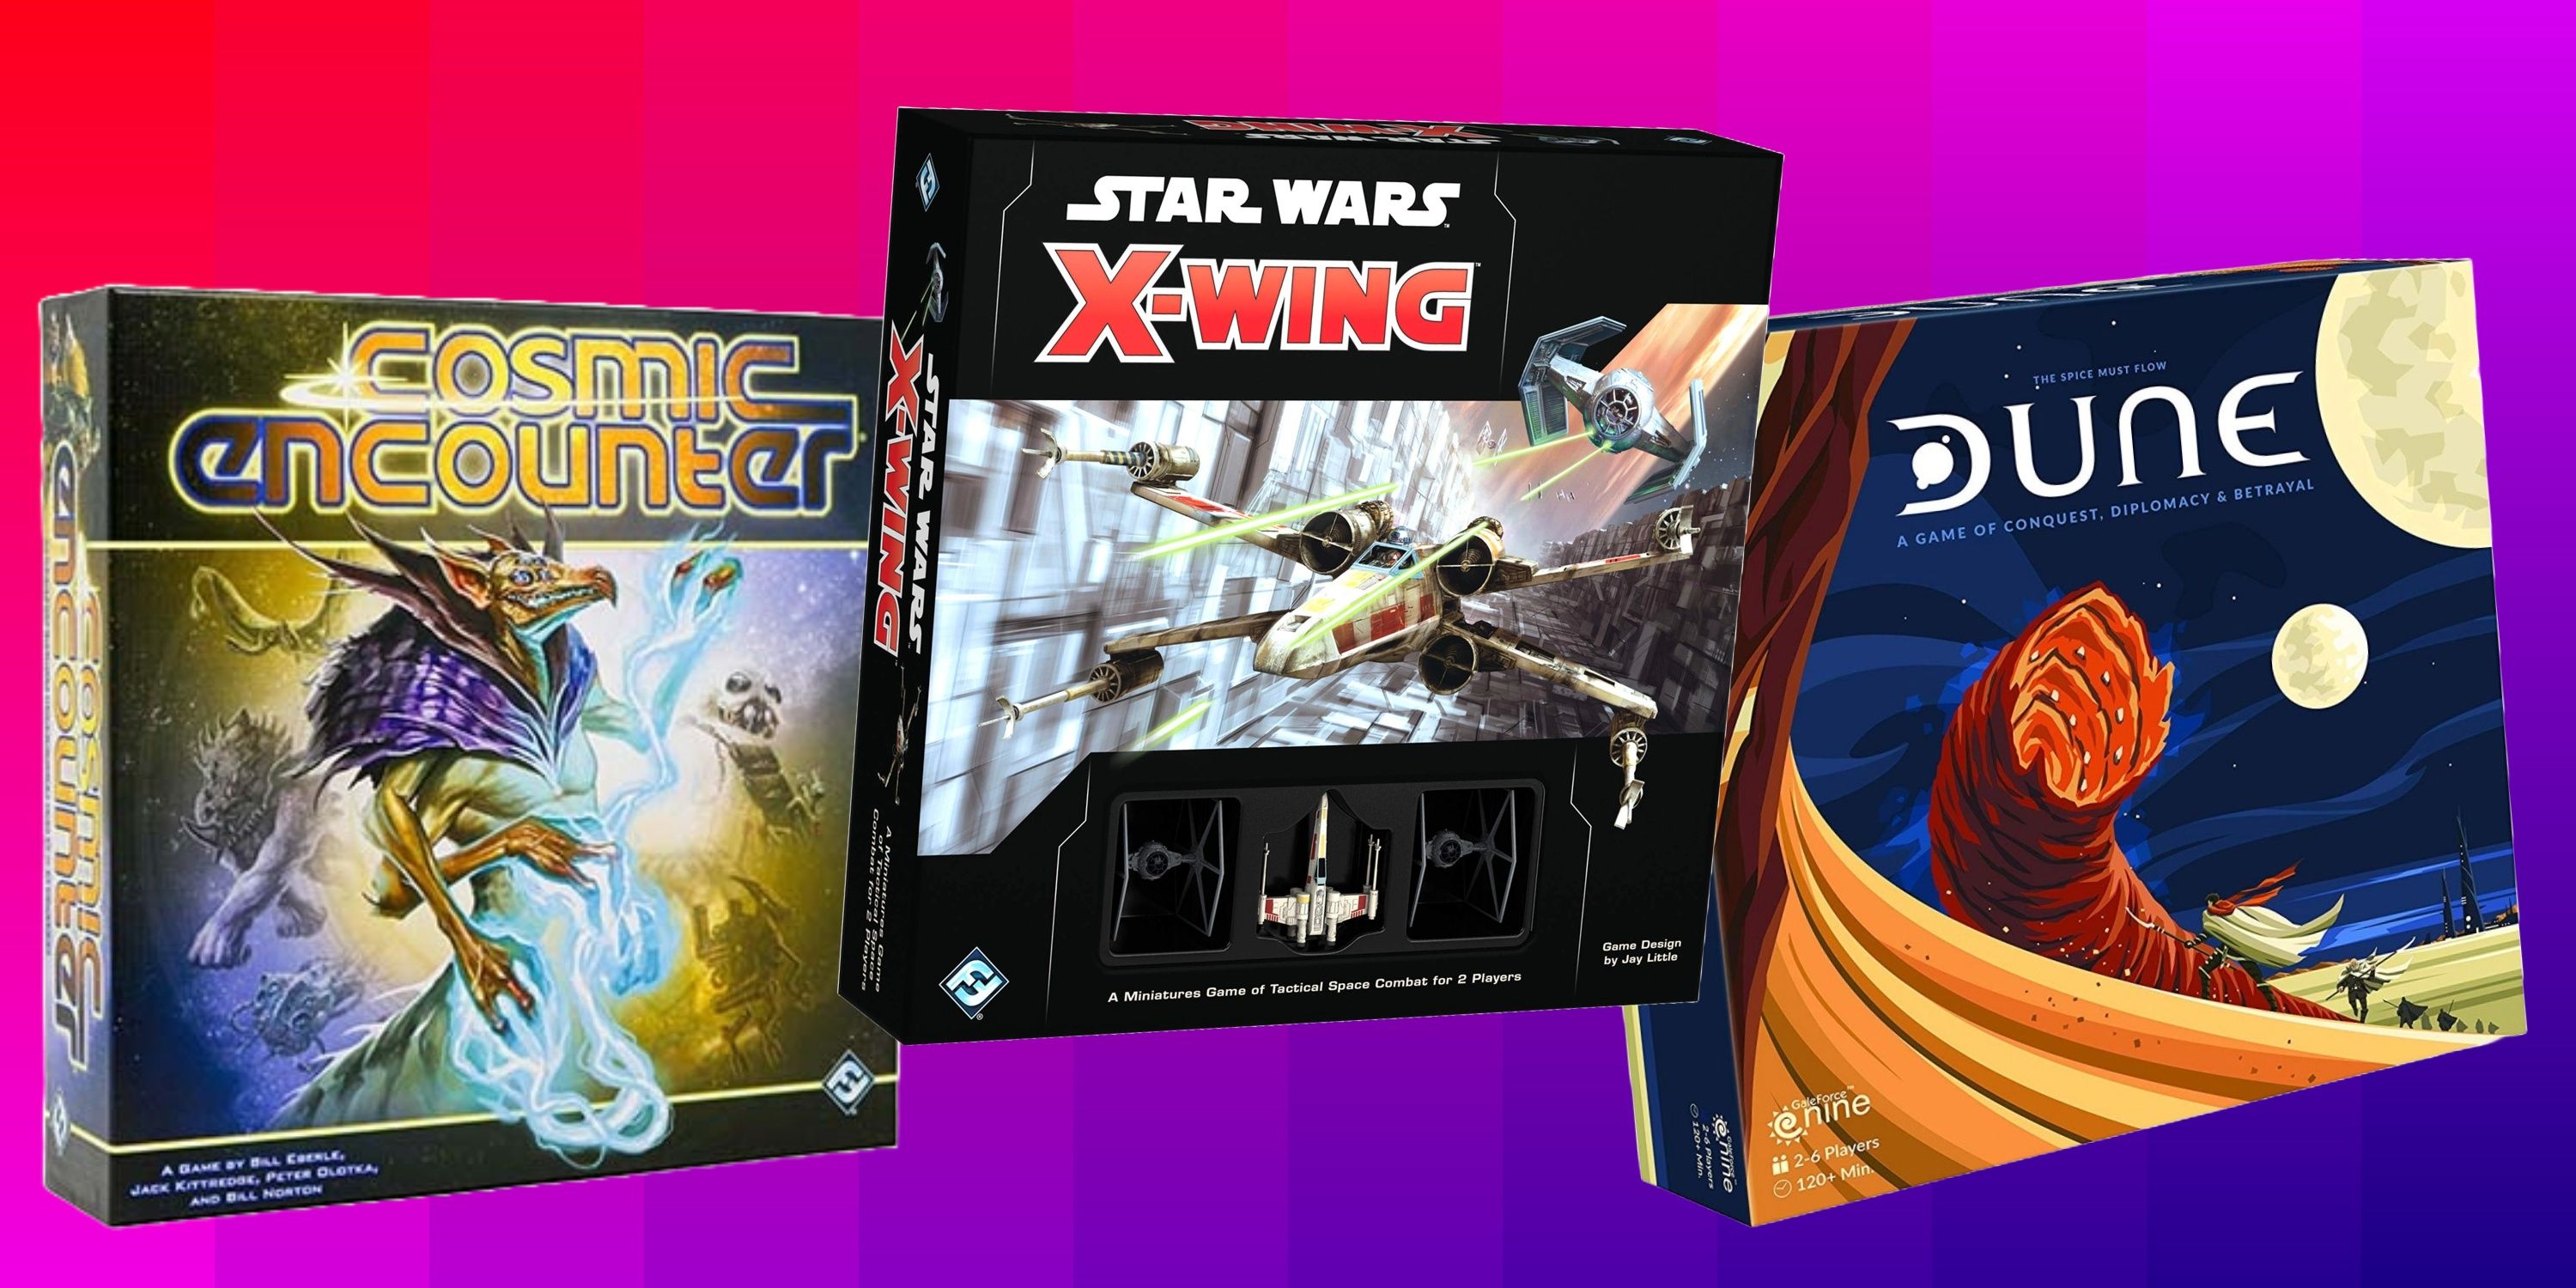 Sci-Fi Board Games With The Best Combat (Featured Image) - Cosmic Encounter + Star Wars X-Wing + Dune (2019)